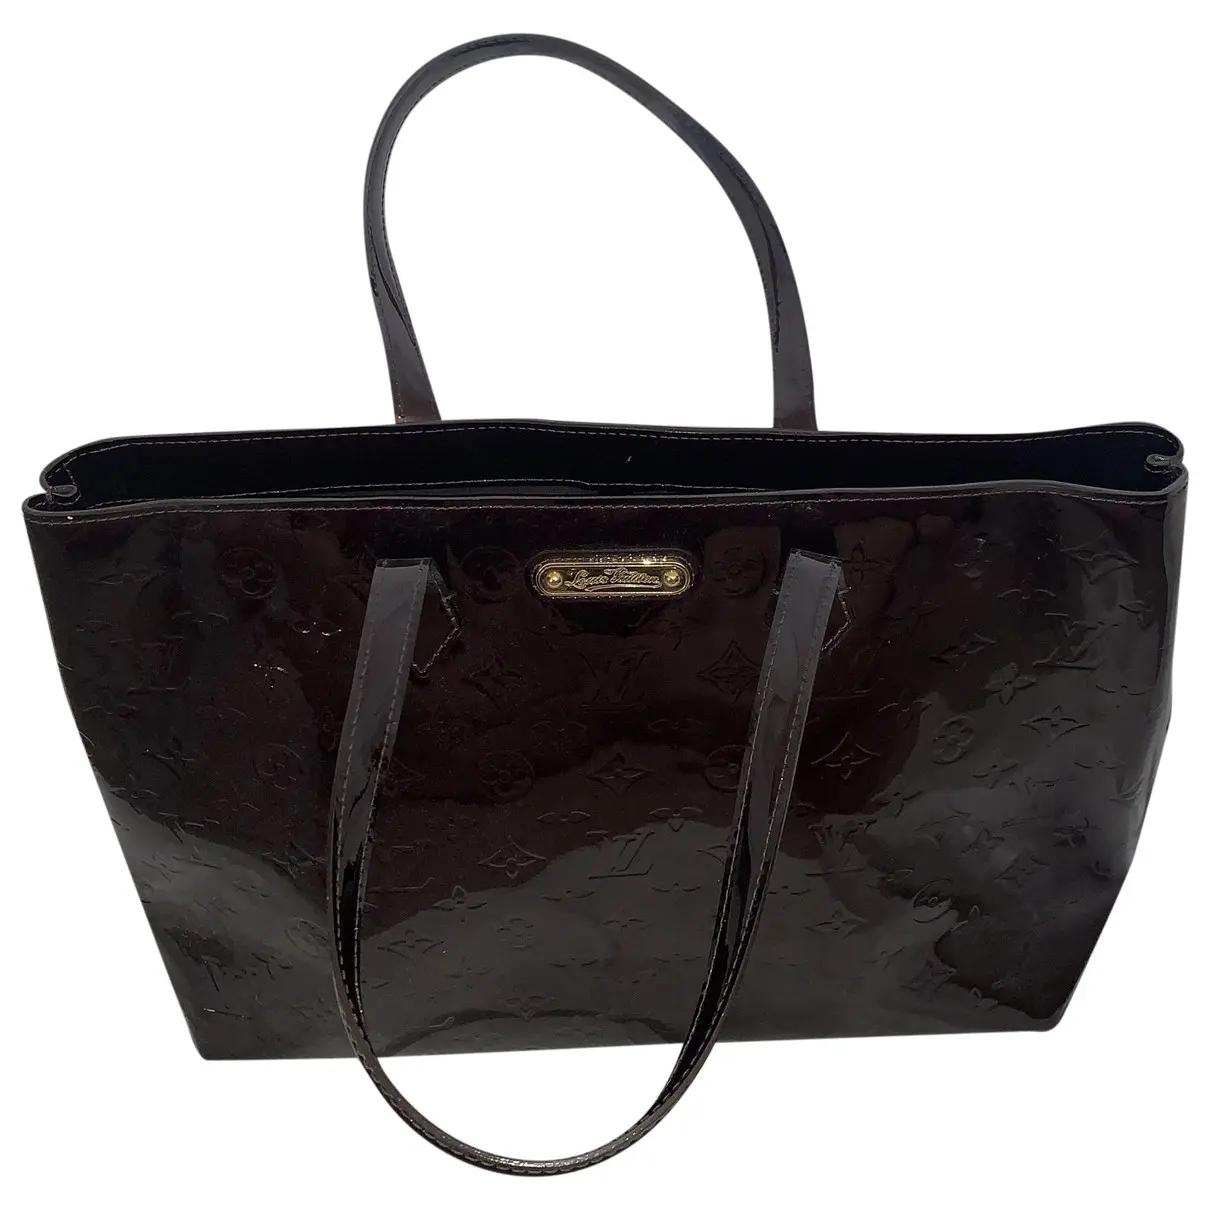 Patent leather tote Louis Vuitton